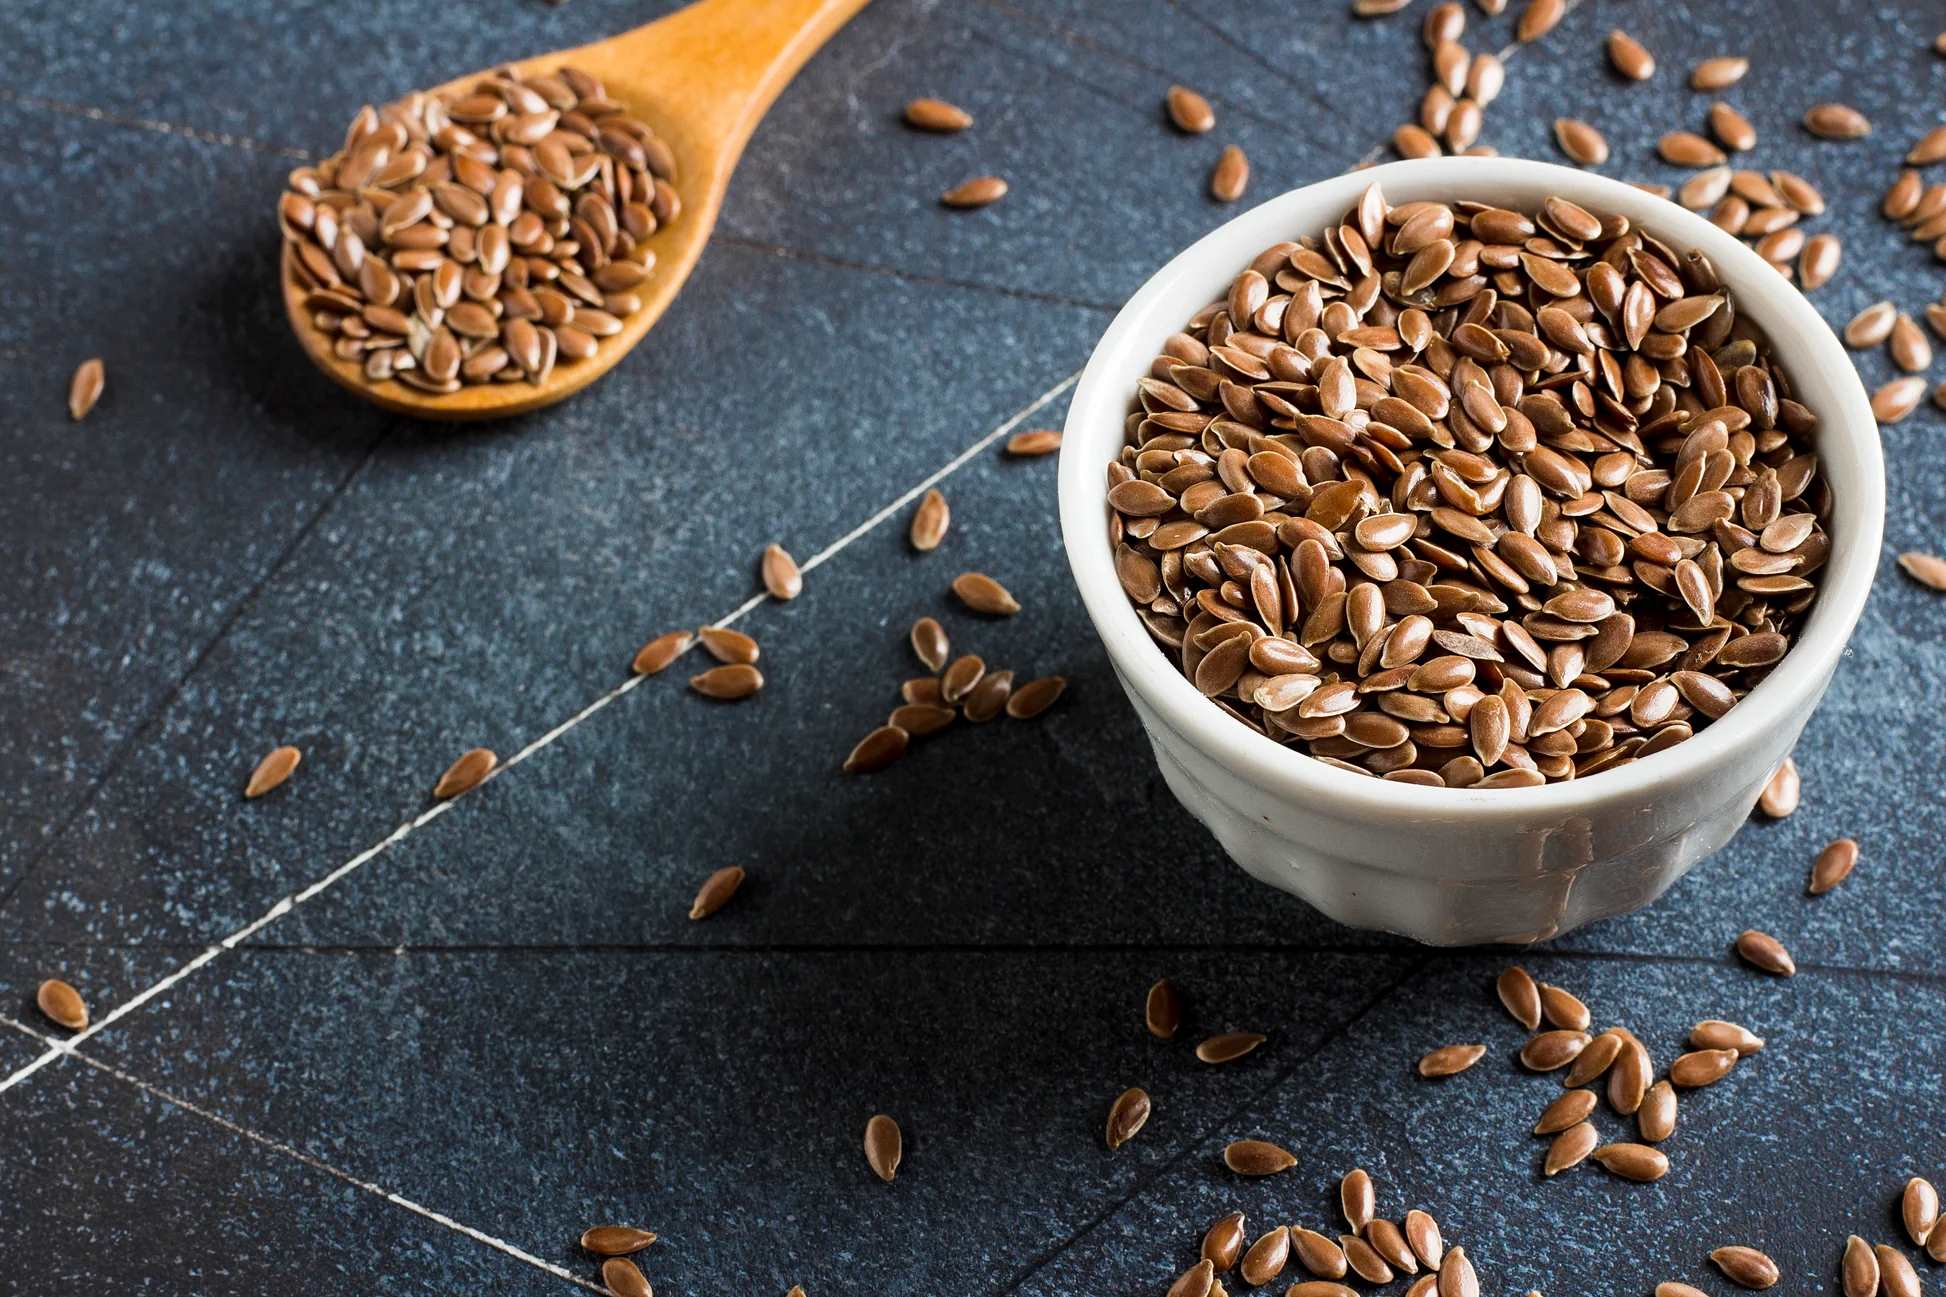 How To Prepare Flax Seeds